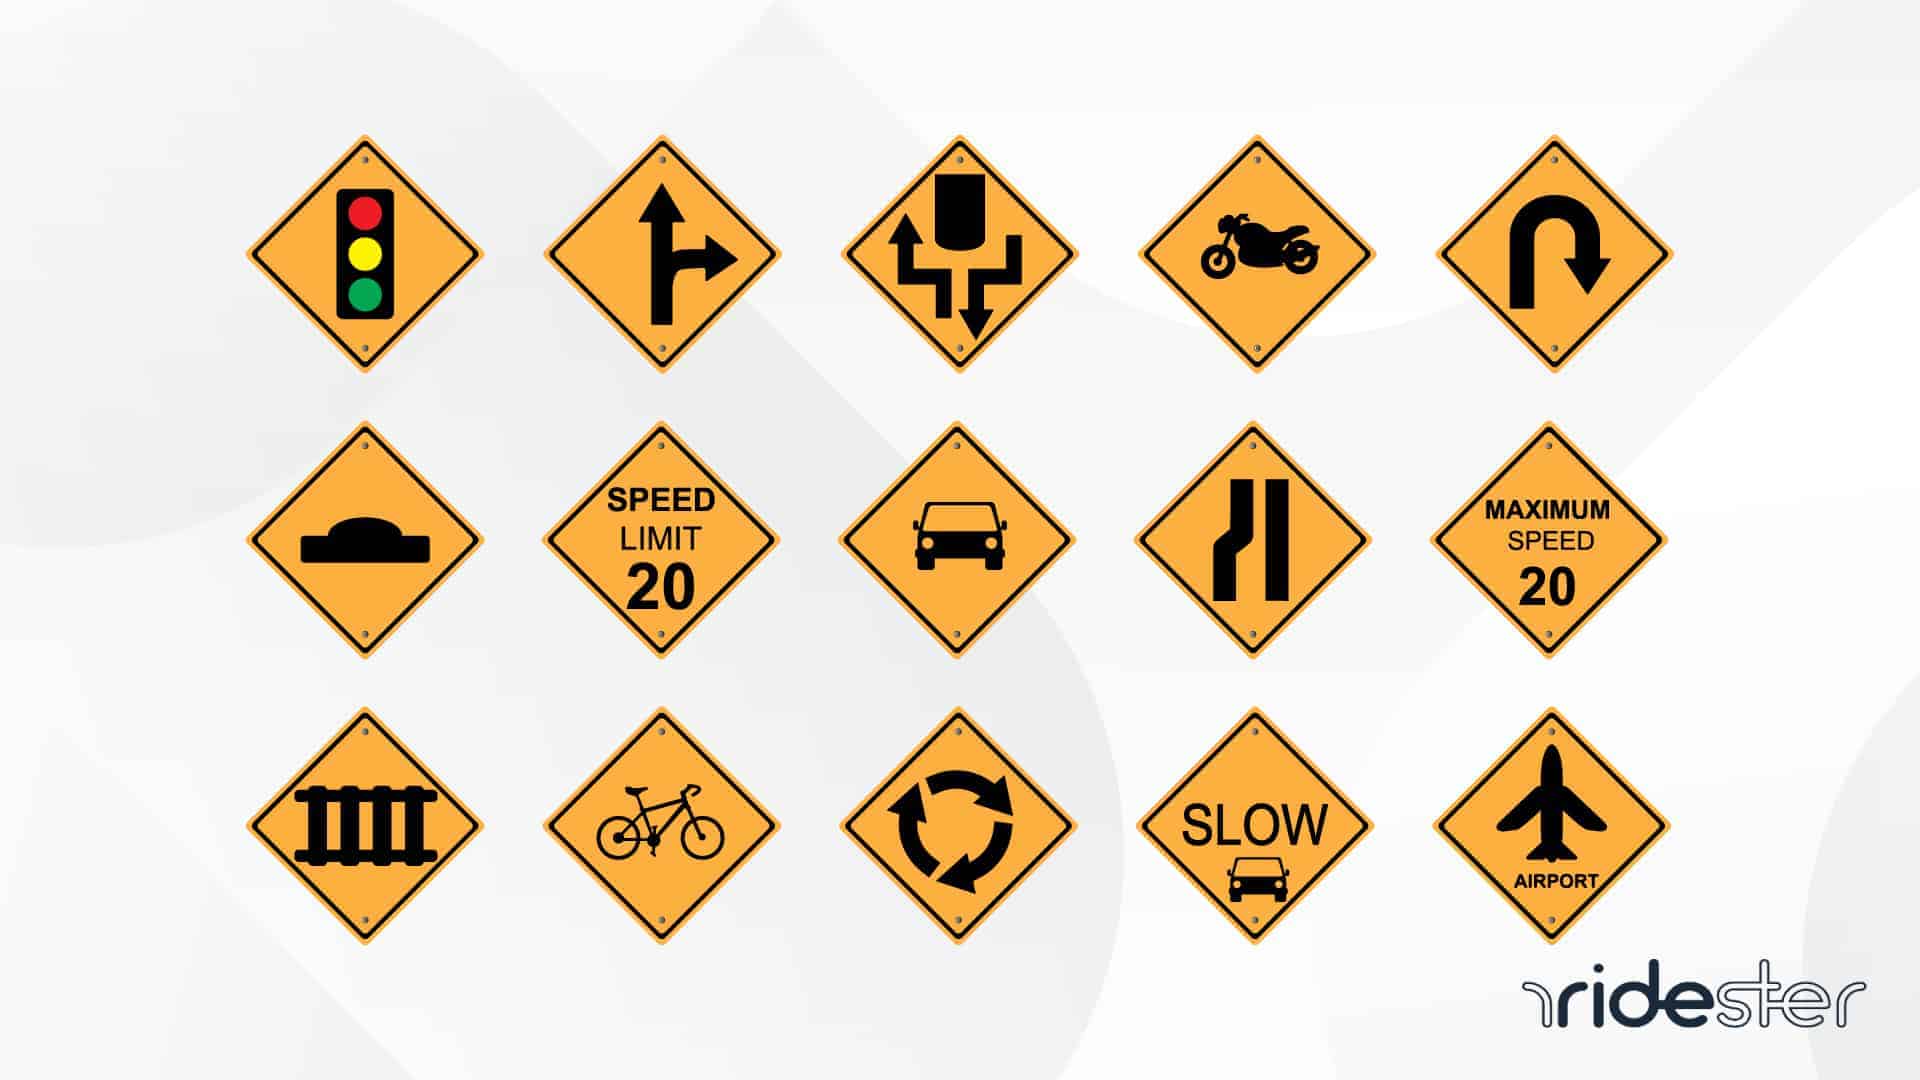 vector graphics image showing signs you would need to know for a road signs test